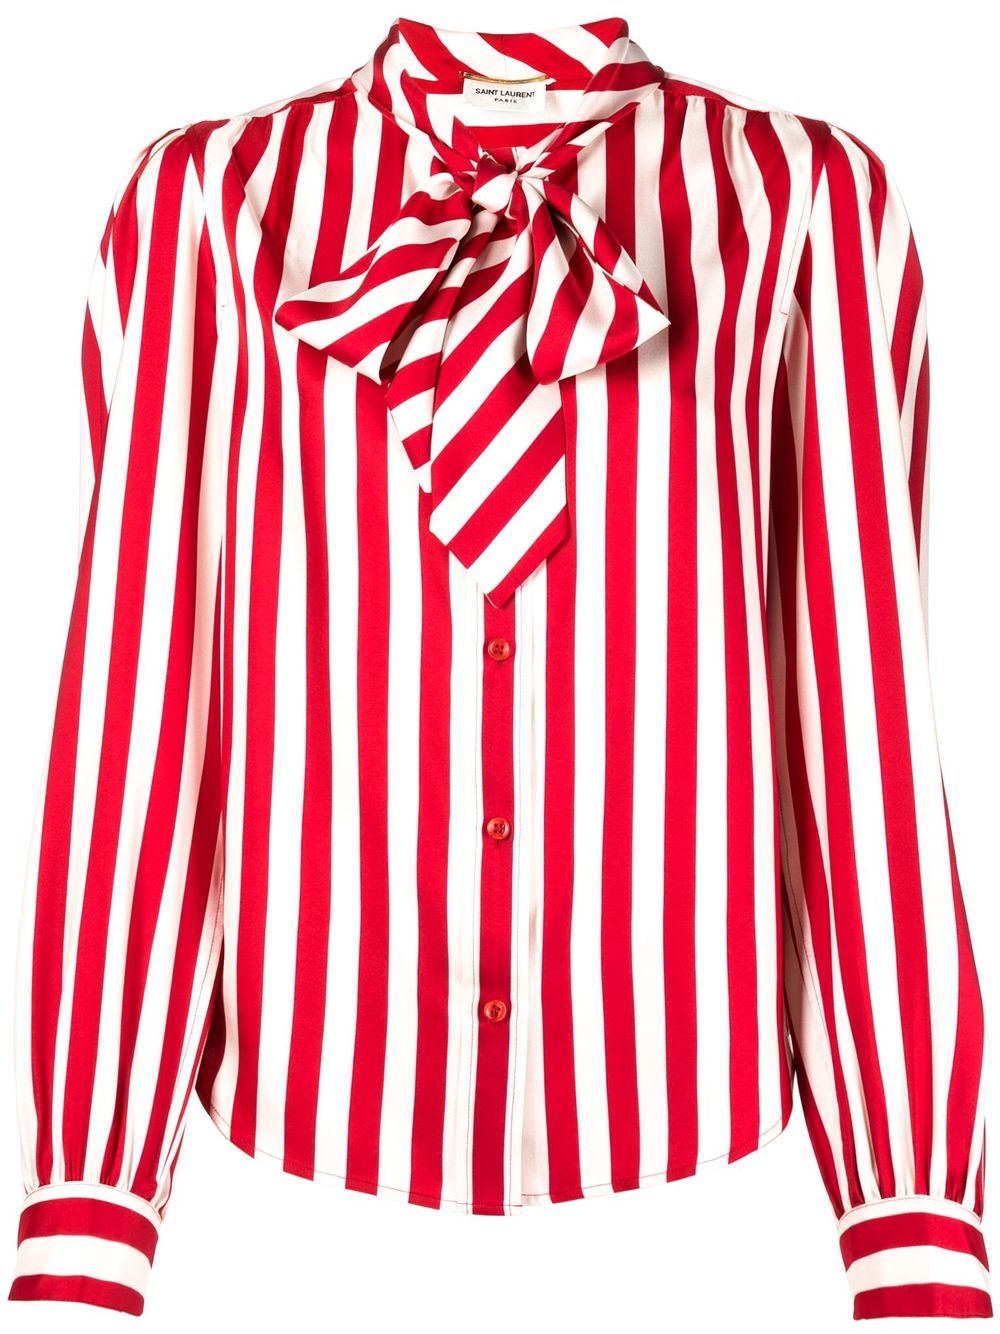 Cardinal Red pussybow striped shirt